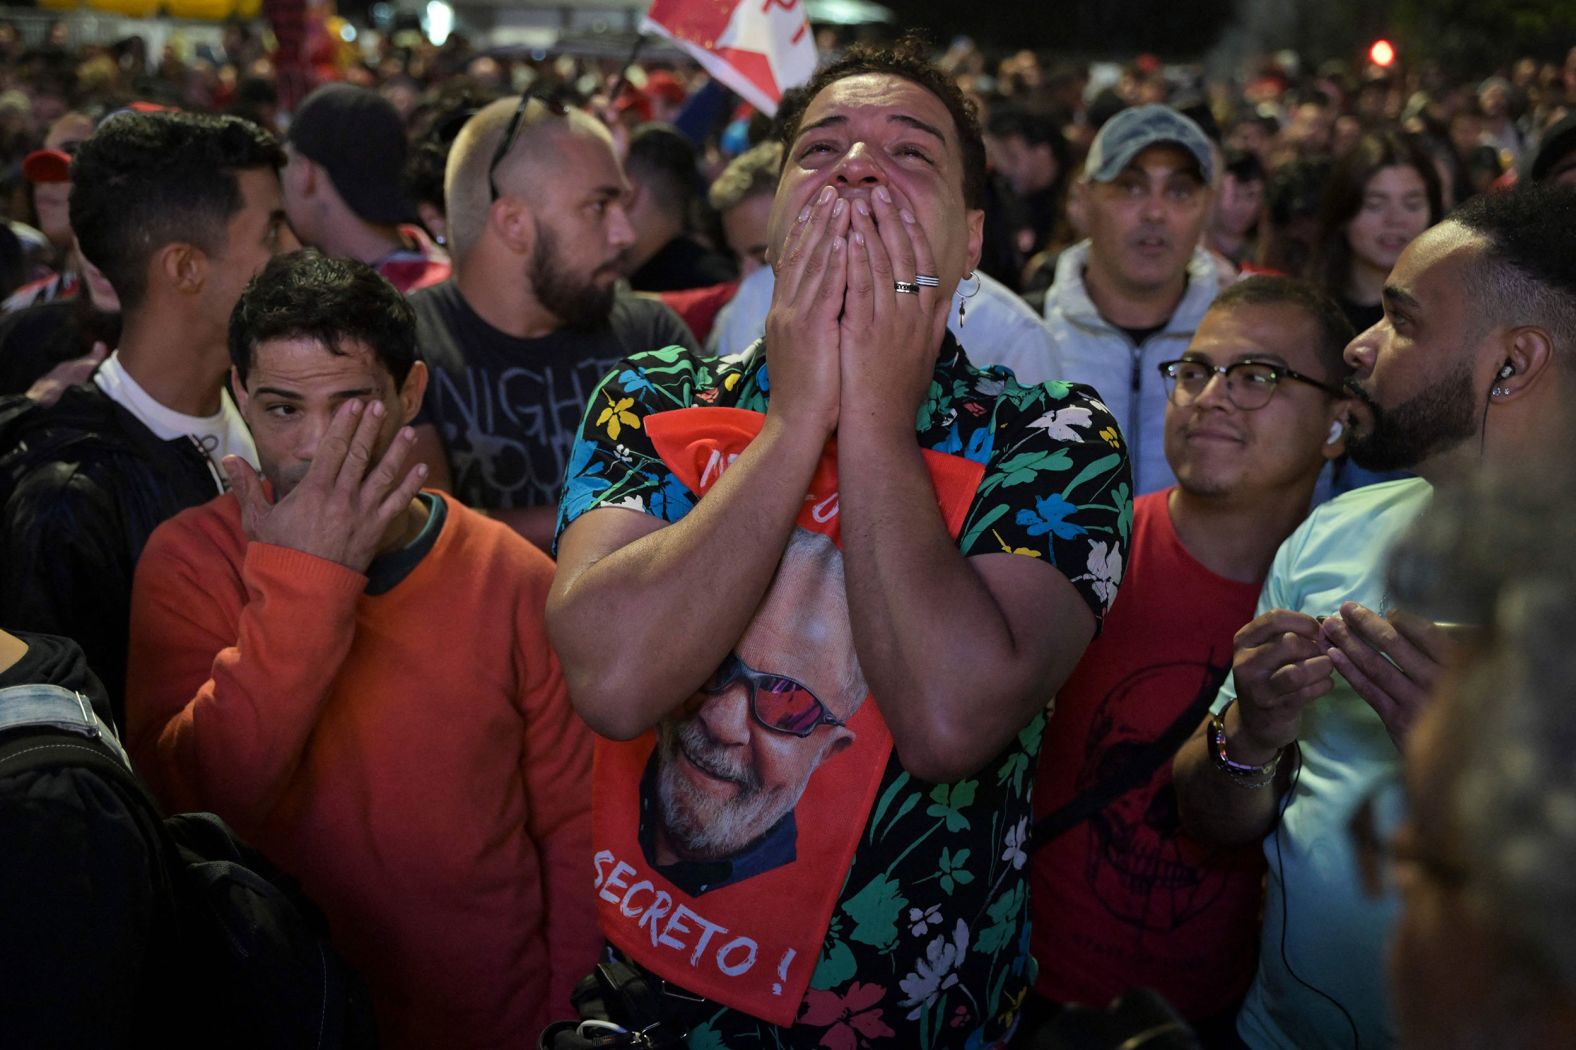 Supporters of Brazilian former President Luiz Inácio "Lula" da Silva react as they watch the vote count of <a href="https://www.cnn.com/2022/10/03/world/gallery/brazil-elections" target="_blank">the presidential election</a> in Sao Paulo, Brazil, on Sunday, October 2. Da Silva's race against far-right President Jair Bolsonaro will go to a second round after no candidate achieved more than 50% of the vote.